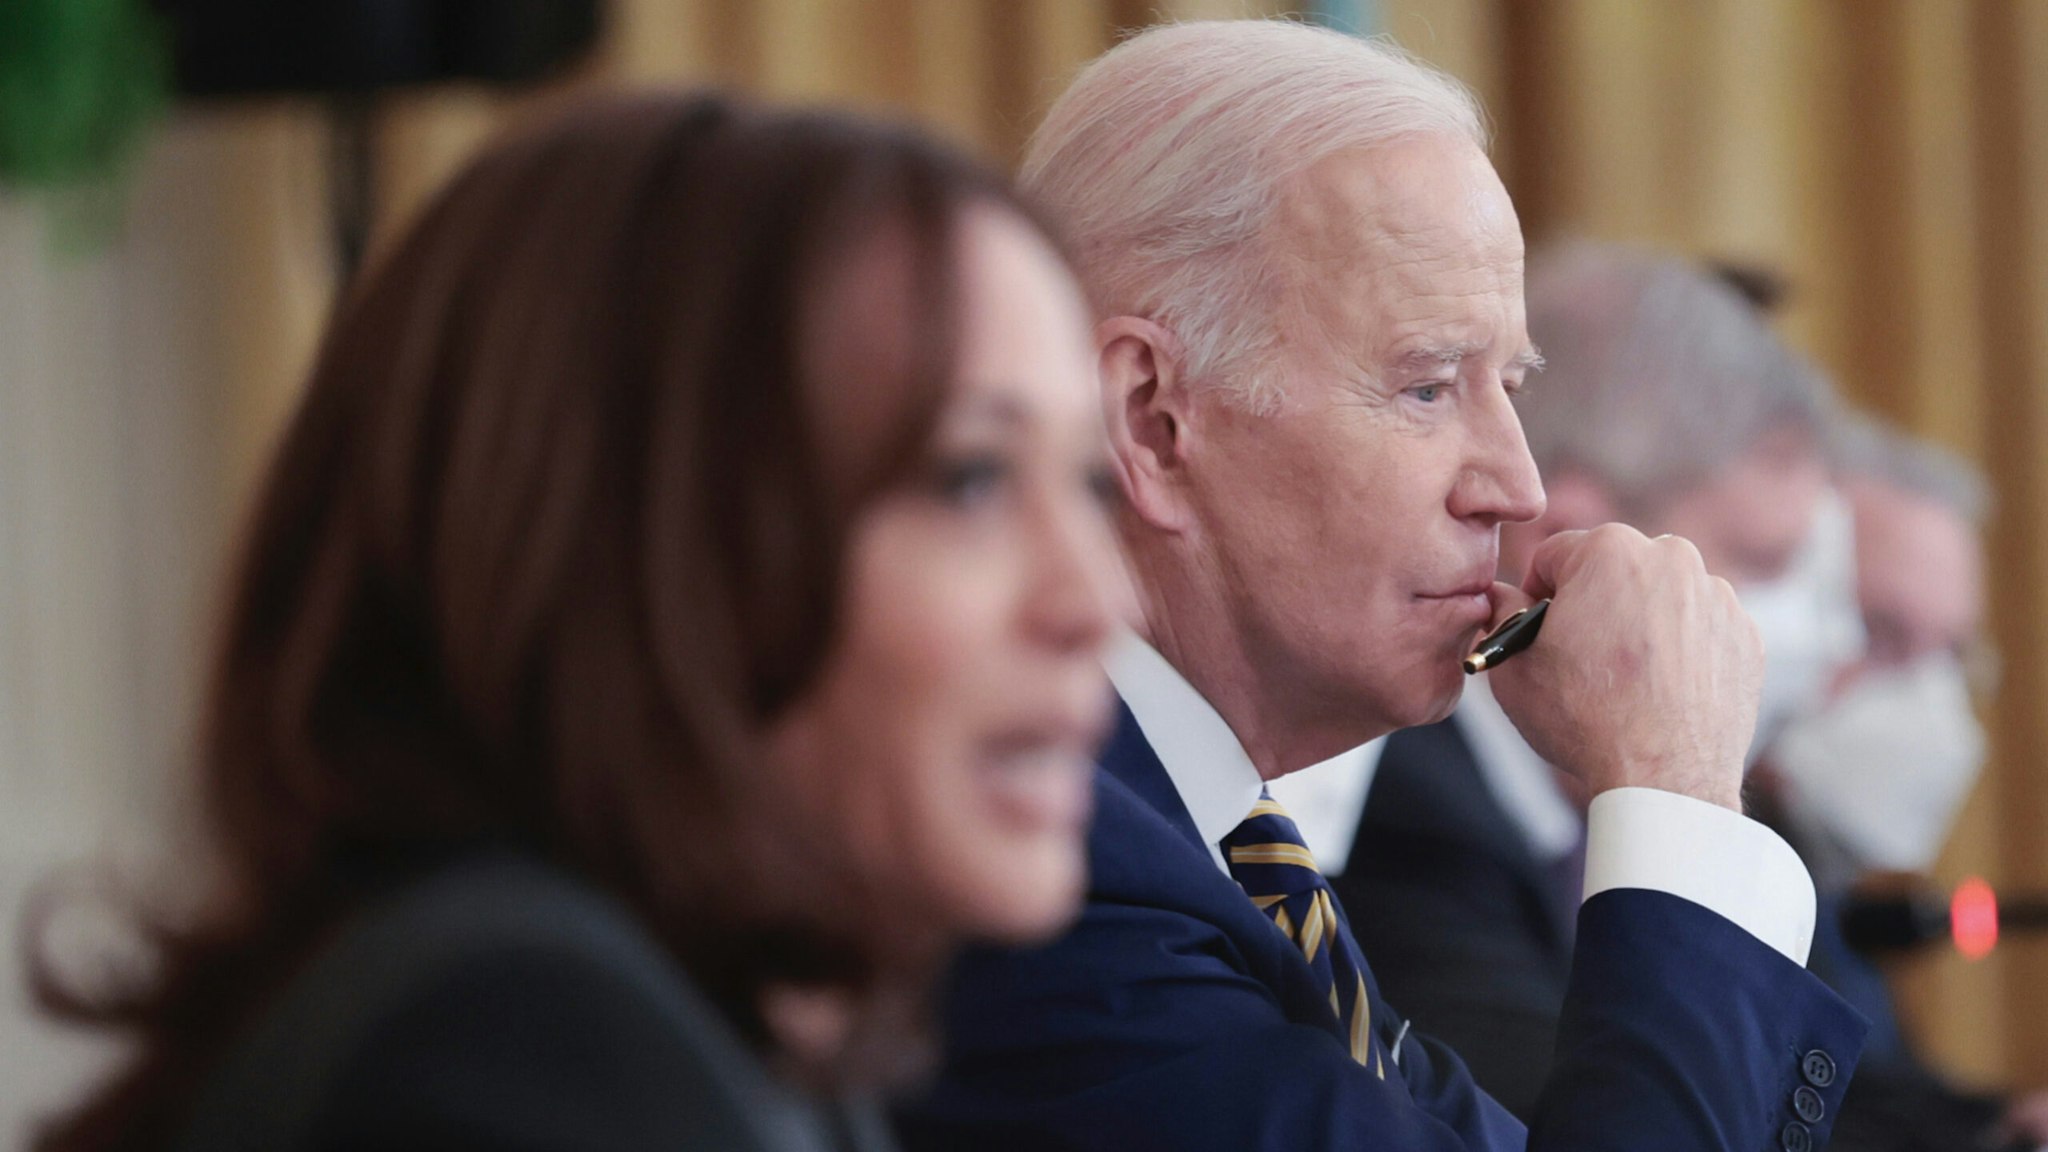 U.S. President Joe Biden listens as Vice president Kamala Harris (L) speaks during an event at the White House with members of the National Governors Association on January 31, 2022 in Washington, DC.